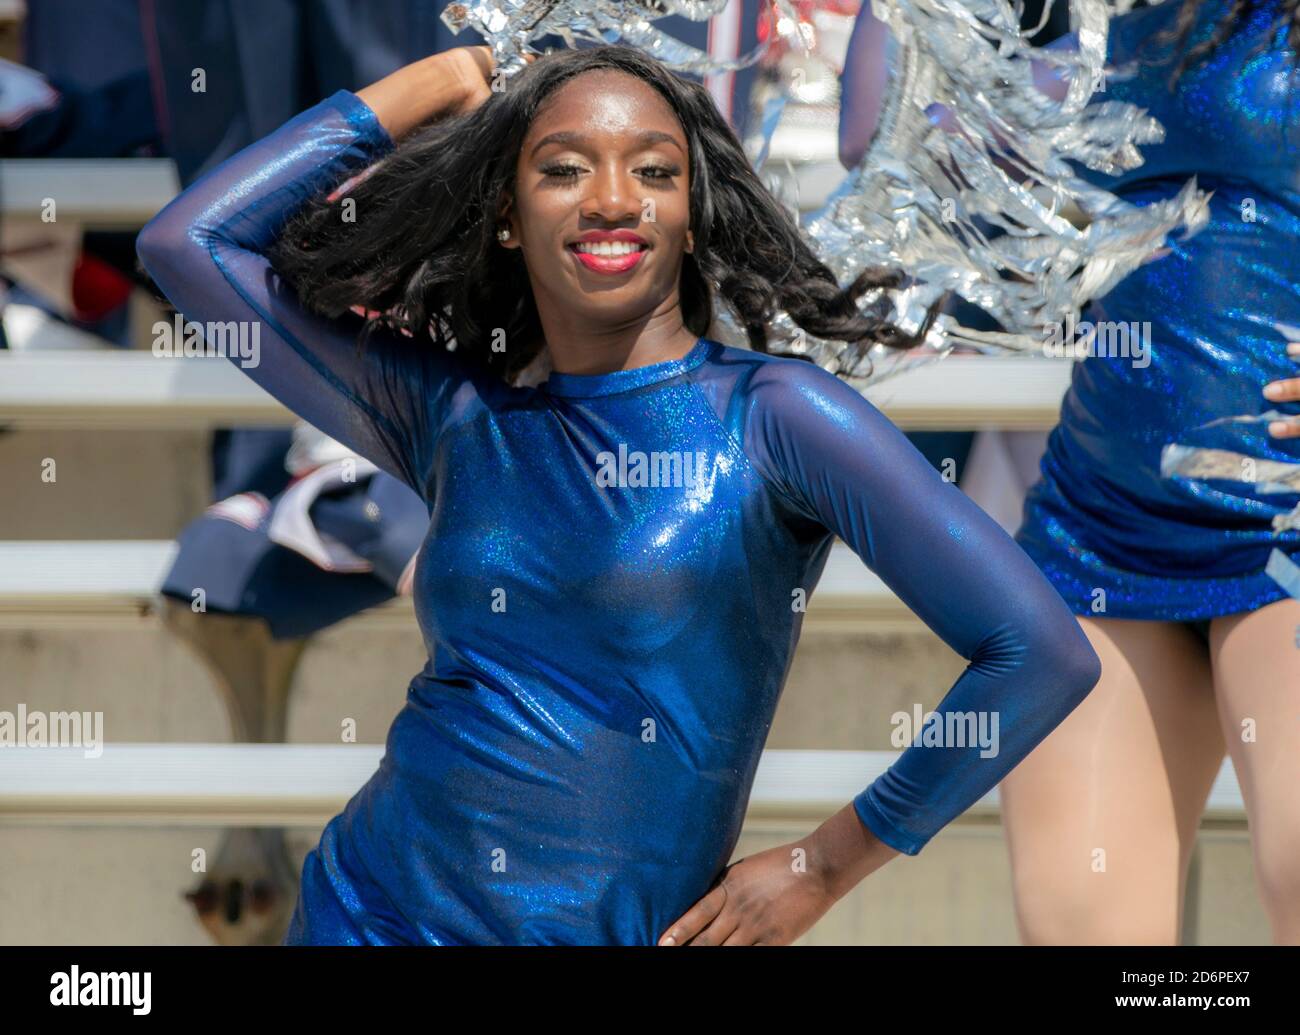 COLLEGE PARK, MD - AUGUST 31: Howard cheerleader during a football game between the University of Maryland and Howard University on August 31, 2019, a Stock Photo